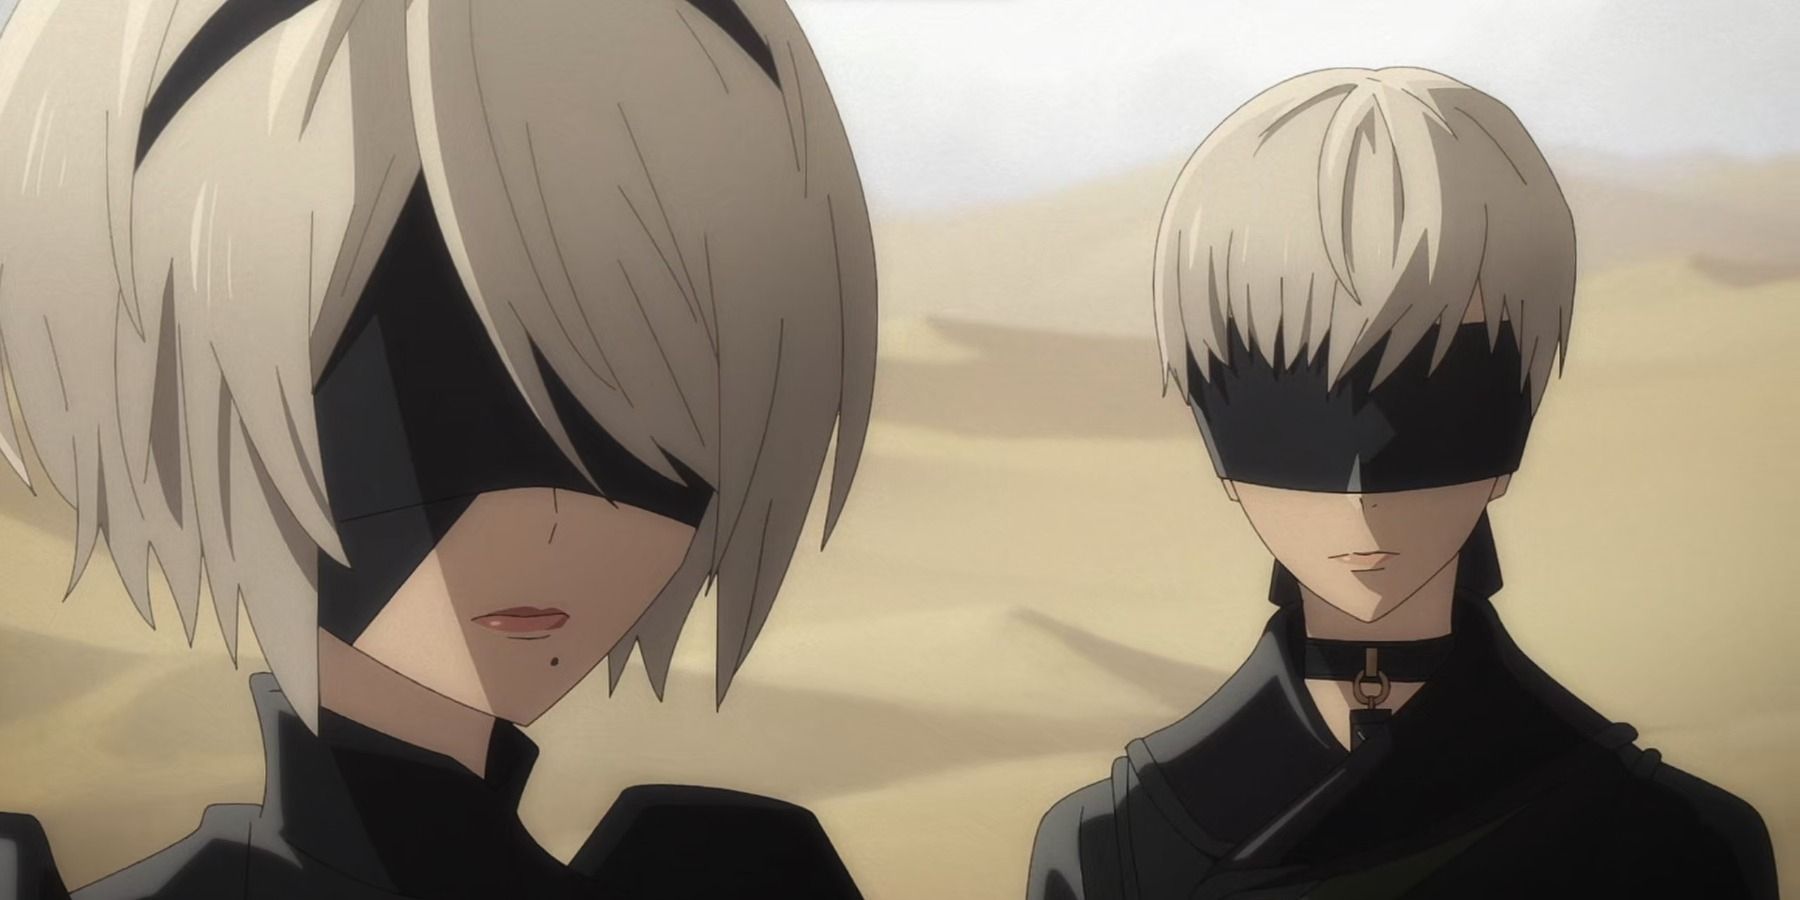 NieR: Automata episode 4 release date, time confirmed after delay